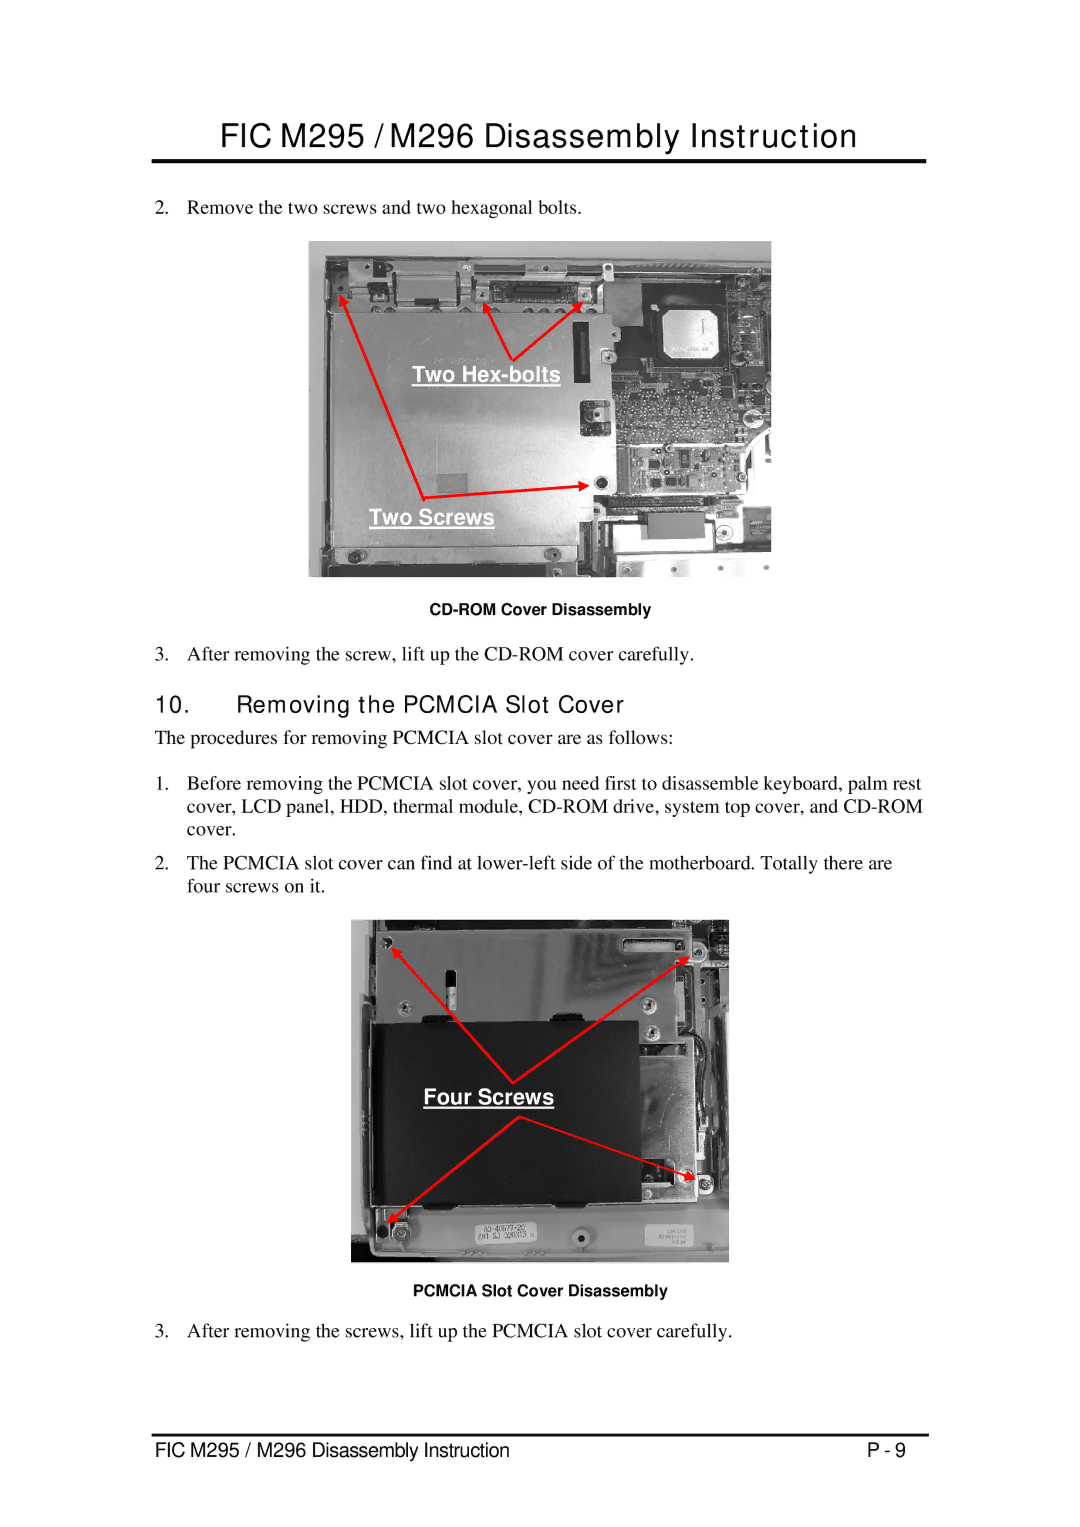 FIC M296, M295 service manual Removing the Pcmcia Slot Cover, CD-ROM Cover Disassembly, Pcmcia Slot Cover Disassembly 